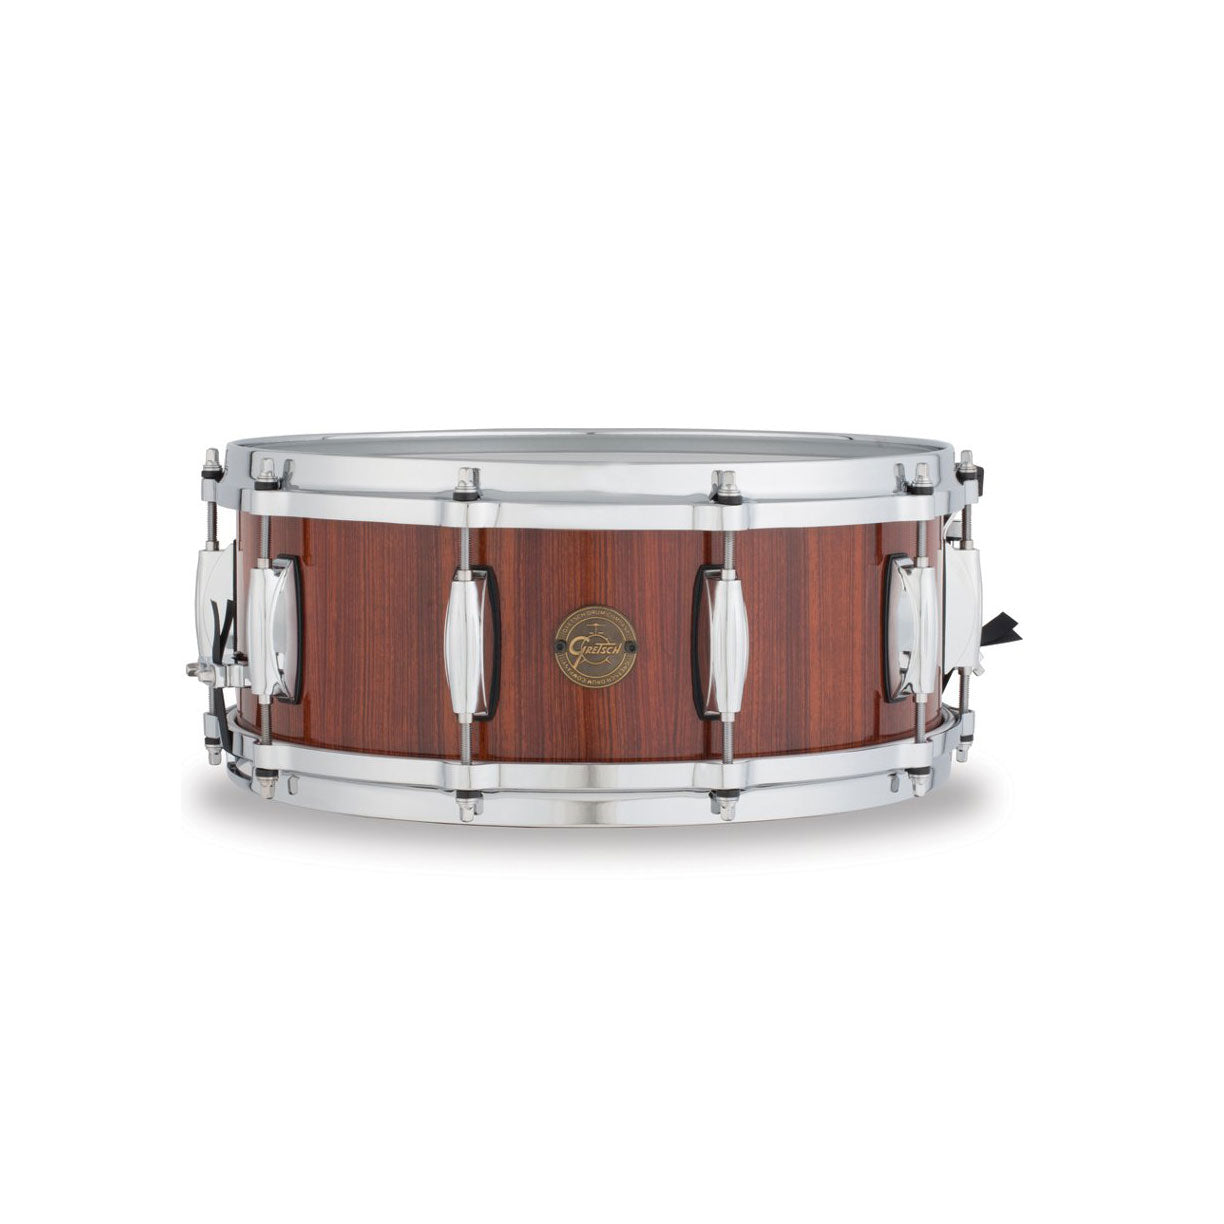 Gretsch S1-5514-RW 5.5x14 Snare Drum - Rosewood